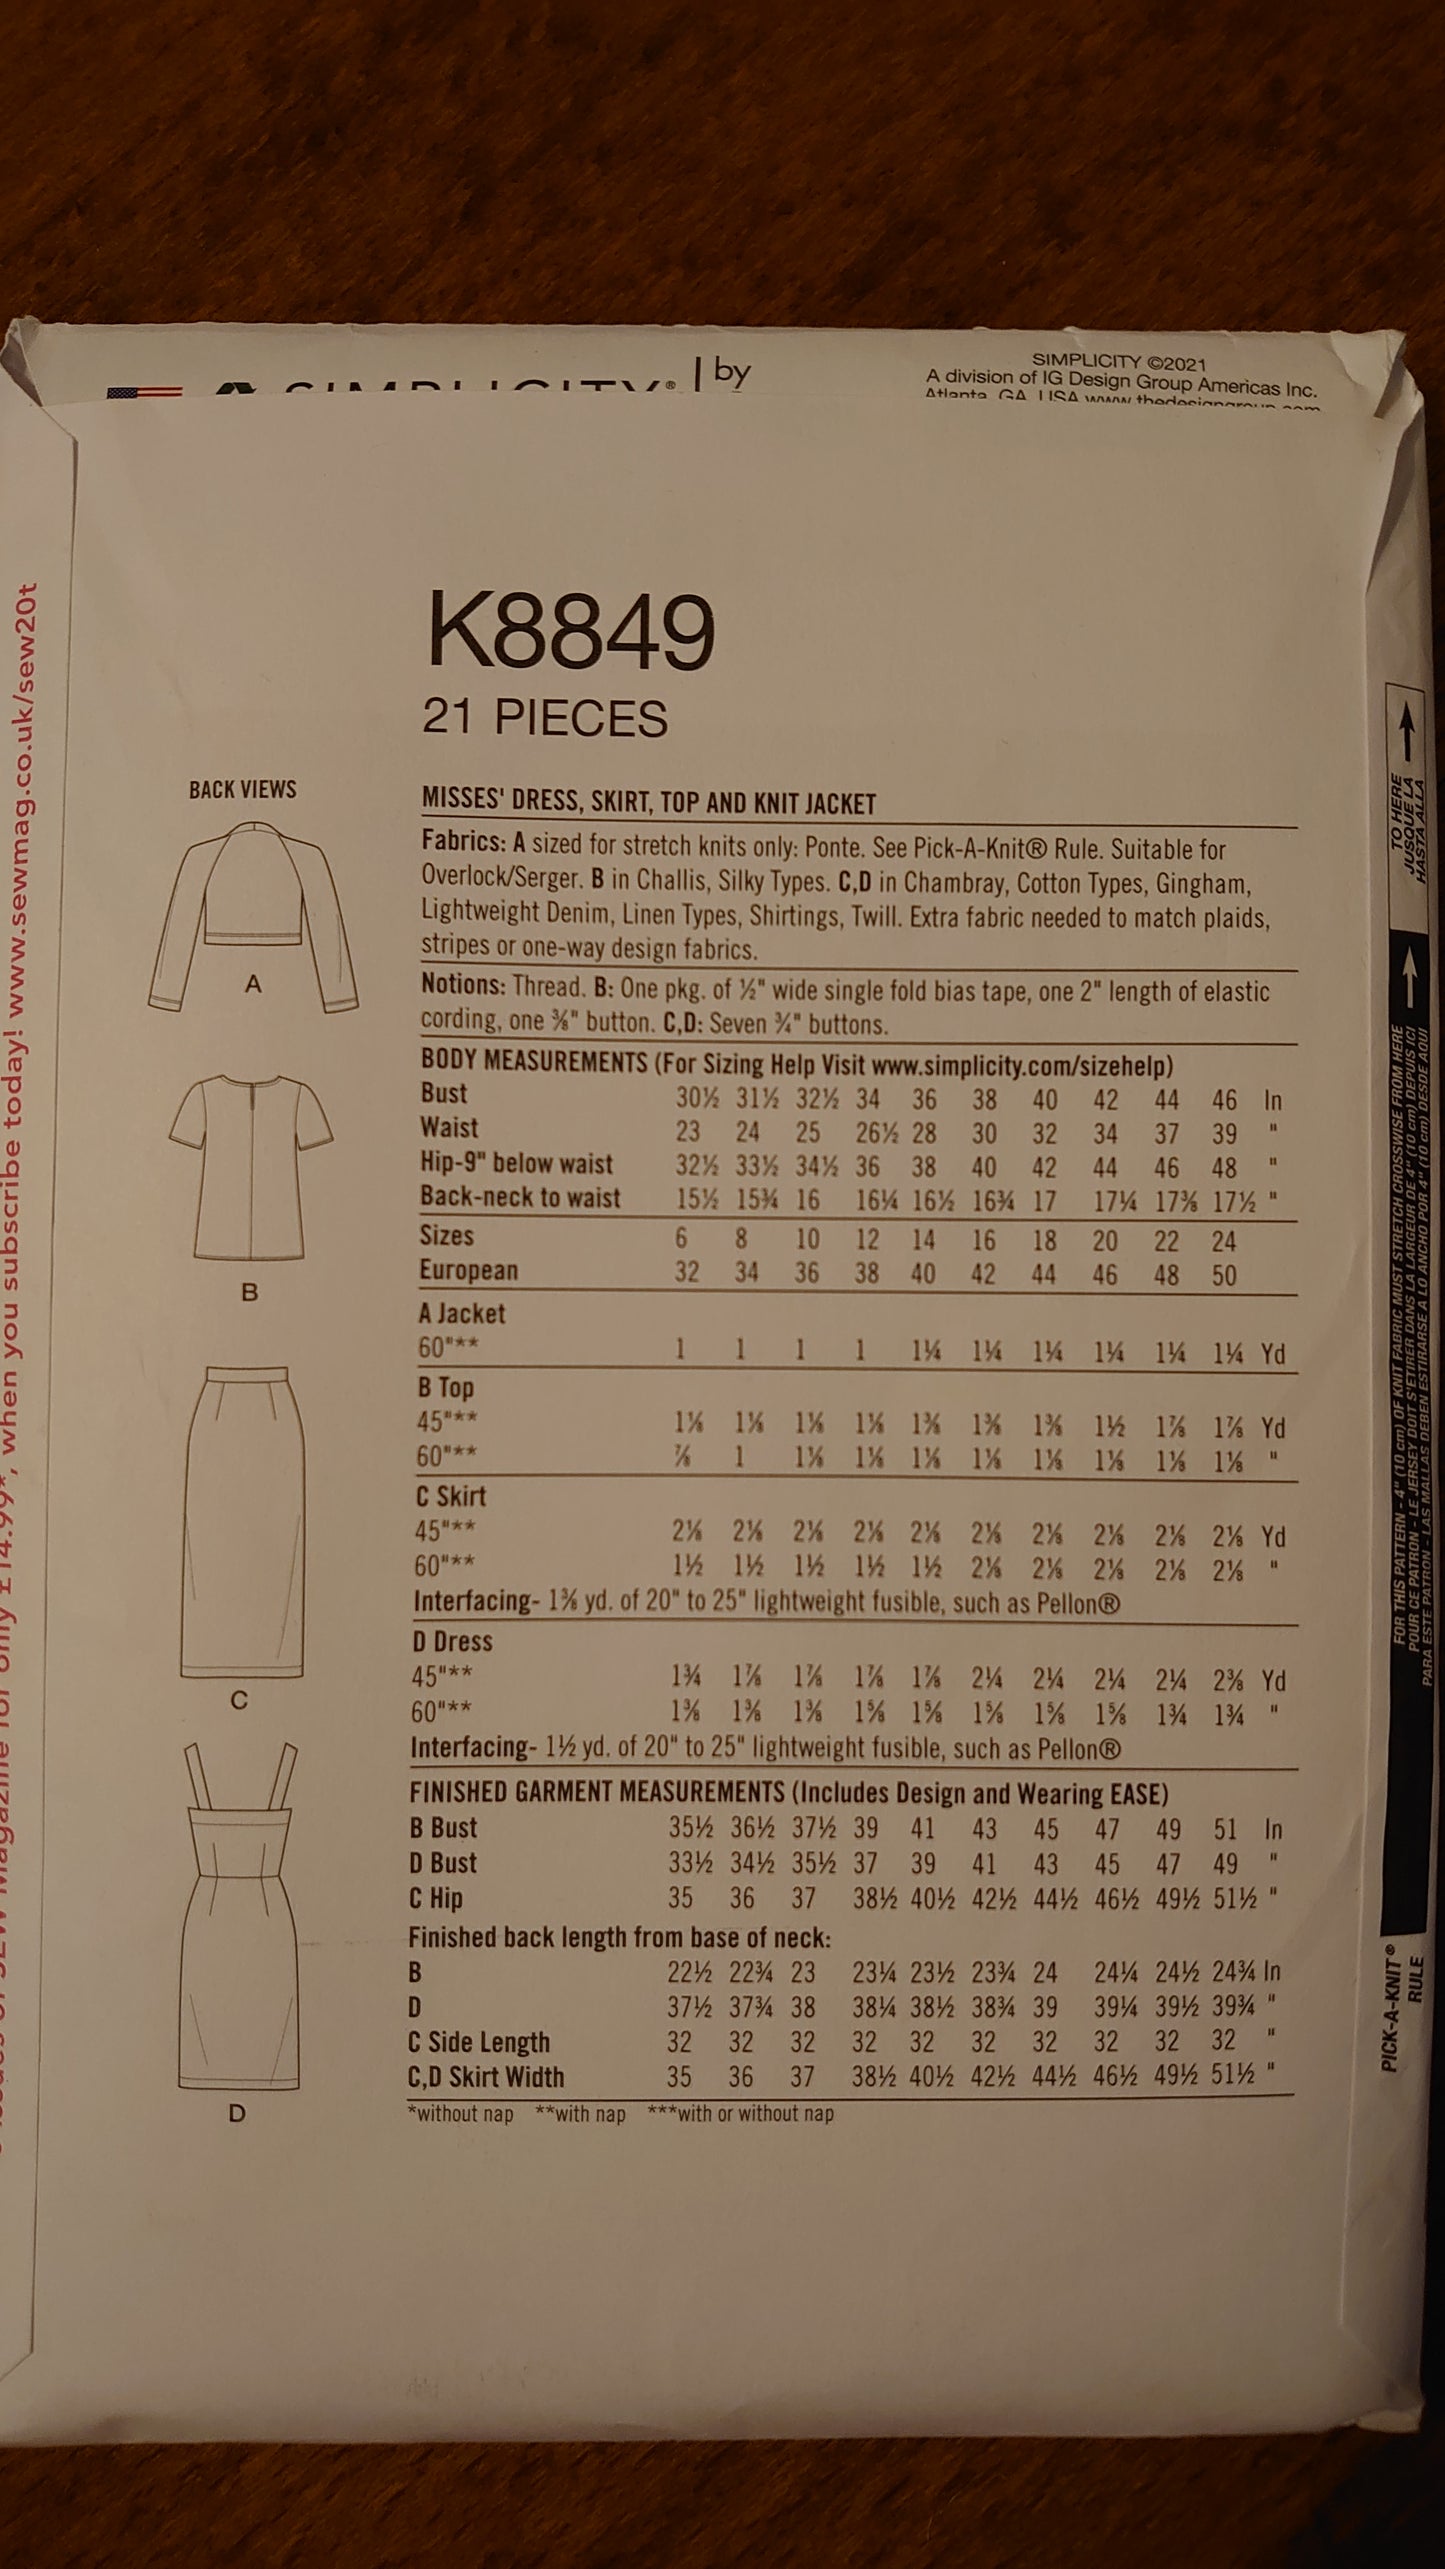 Simplicity K8849 H5 Sewing Pattern